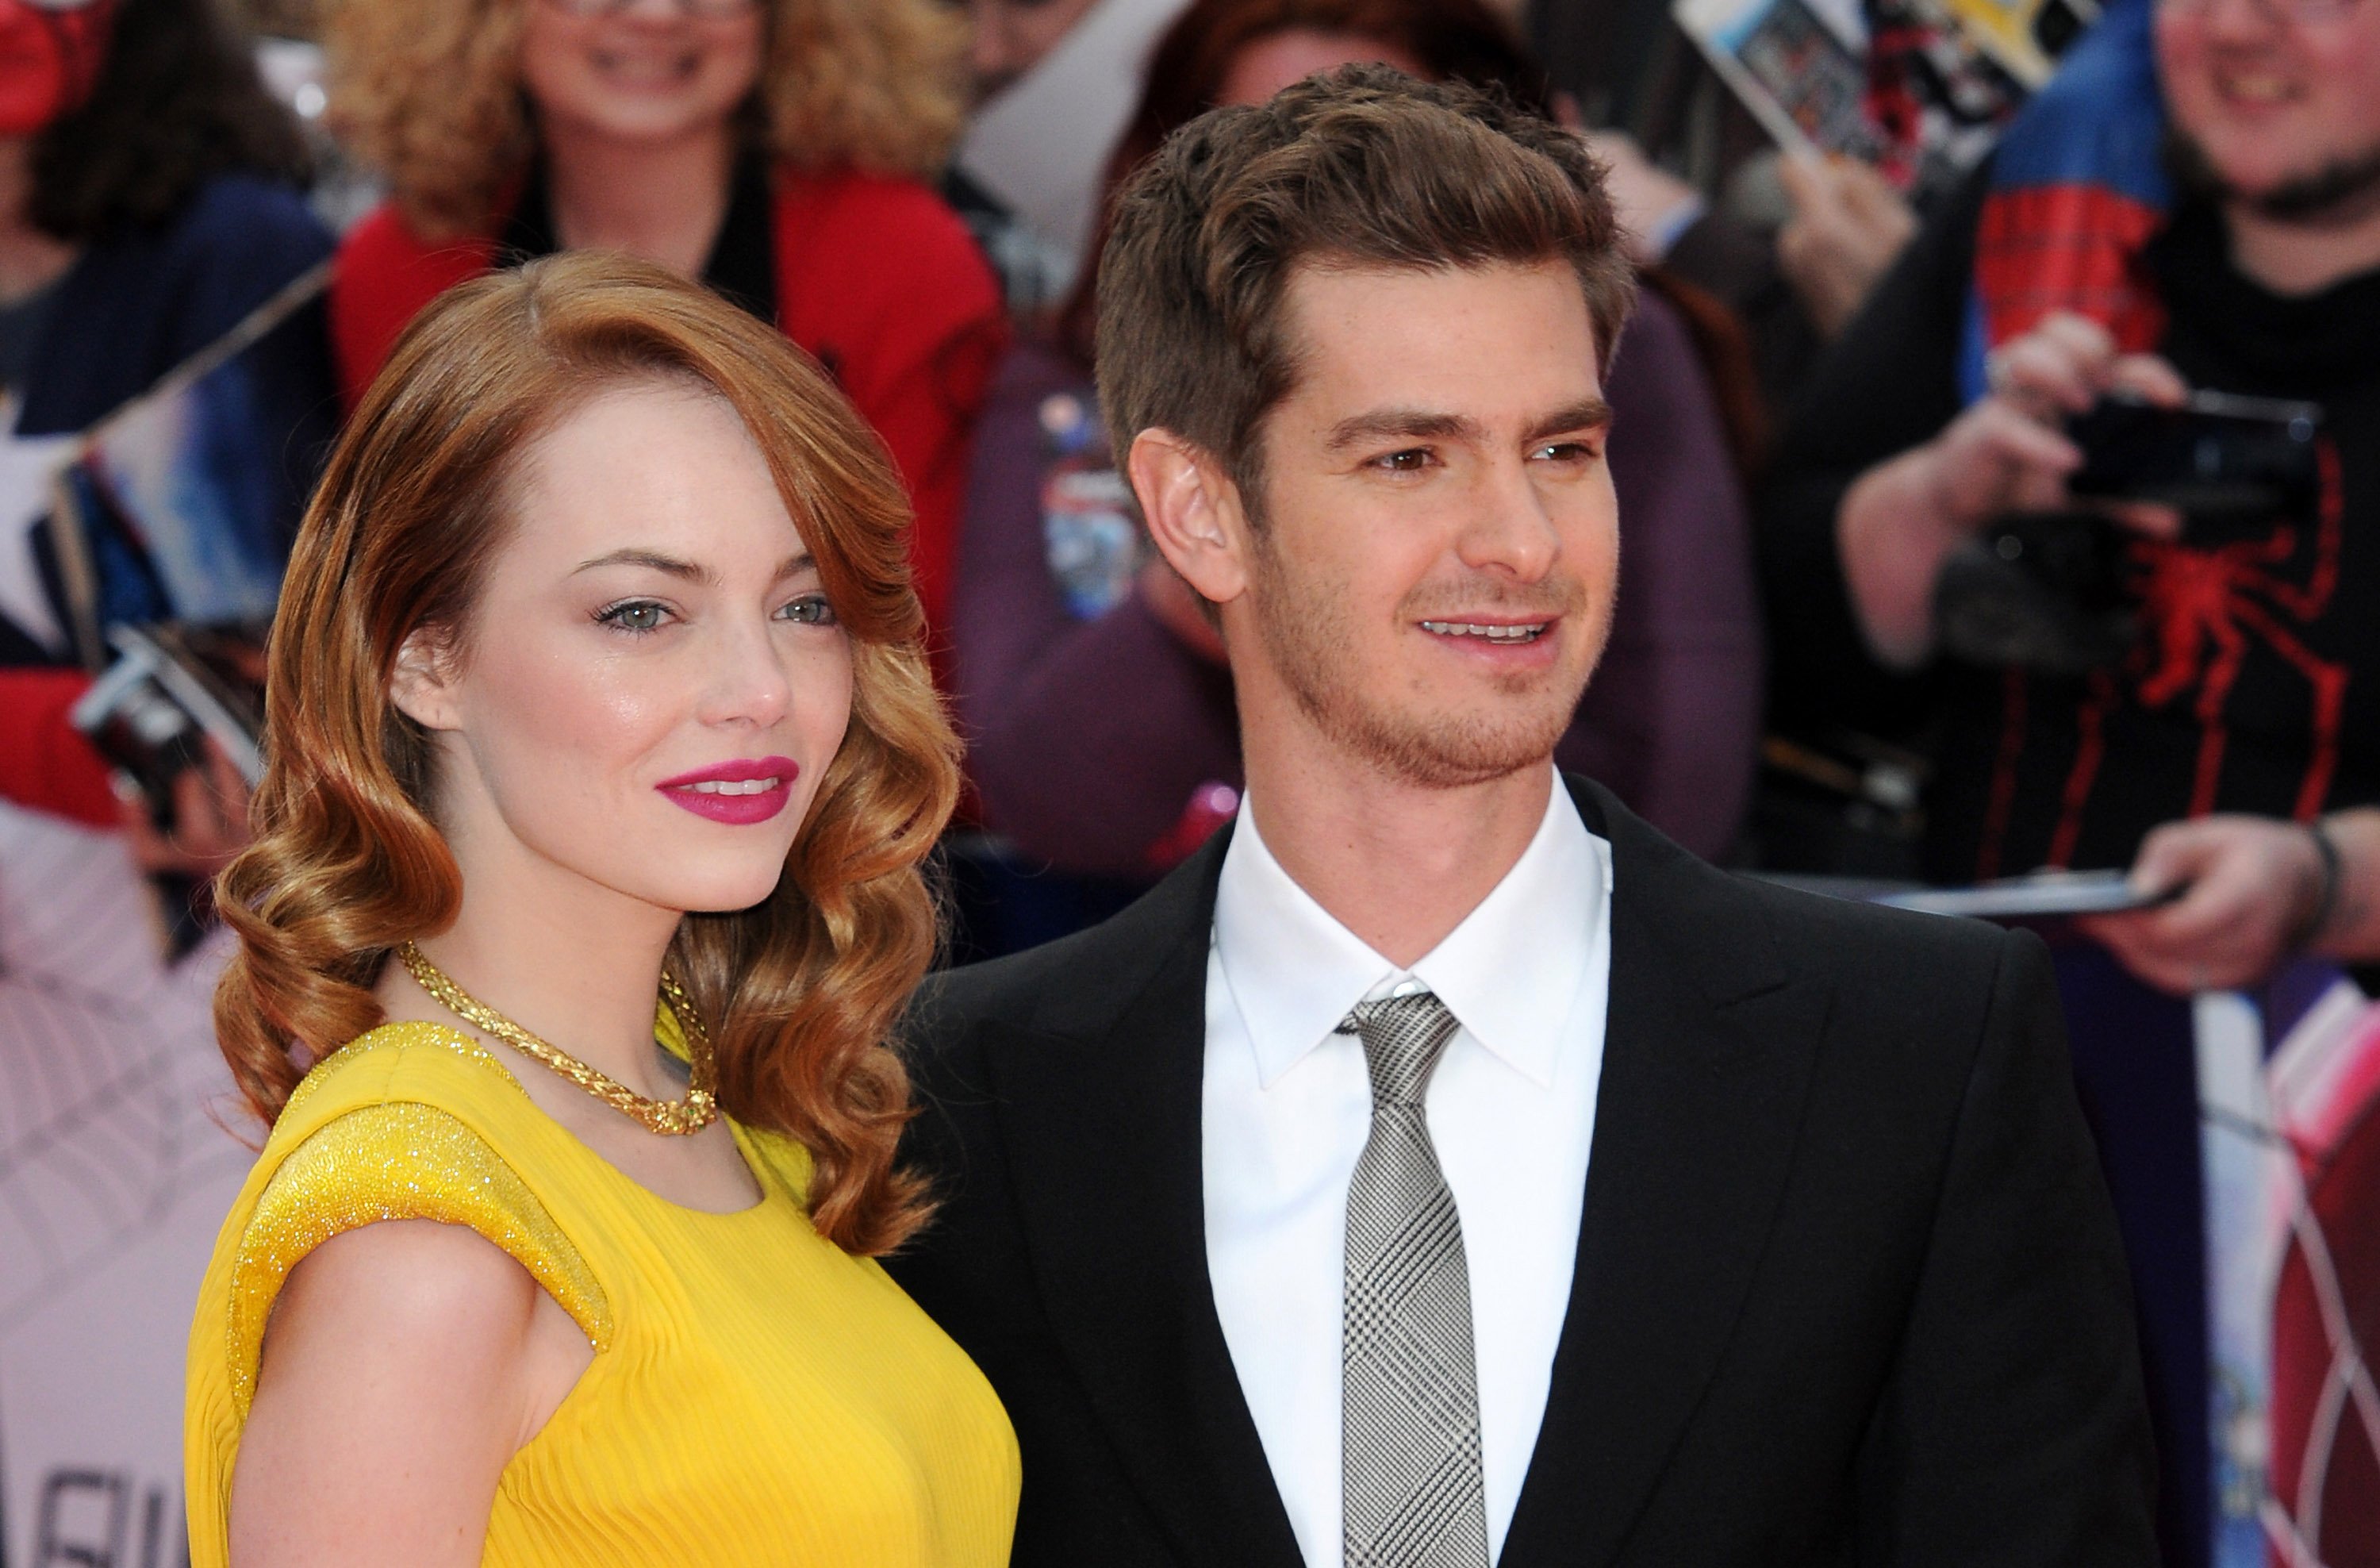 Emma Stone and Andrew Garfield at the World Premiere of "The Amazing Spider-Man 2" on April 10, 2014 in London. | Source: Getty Images